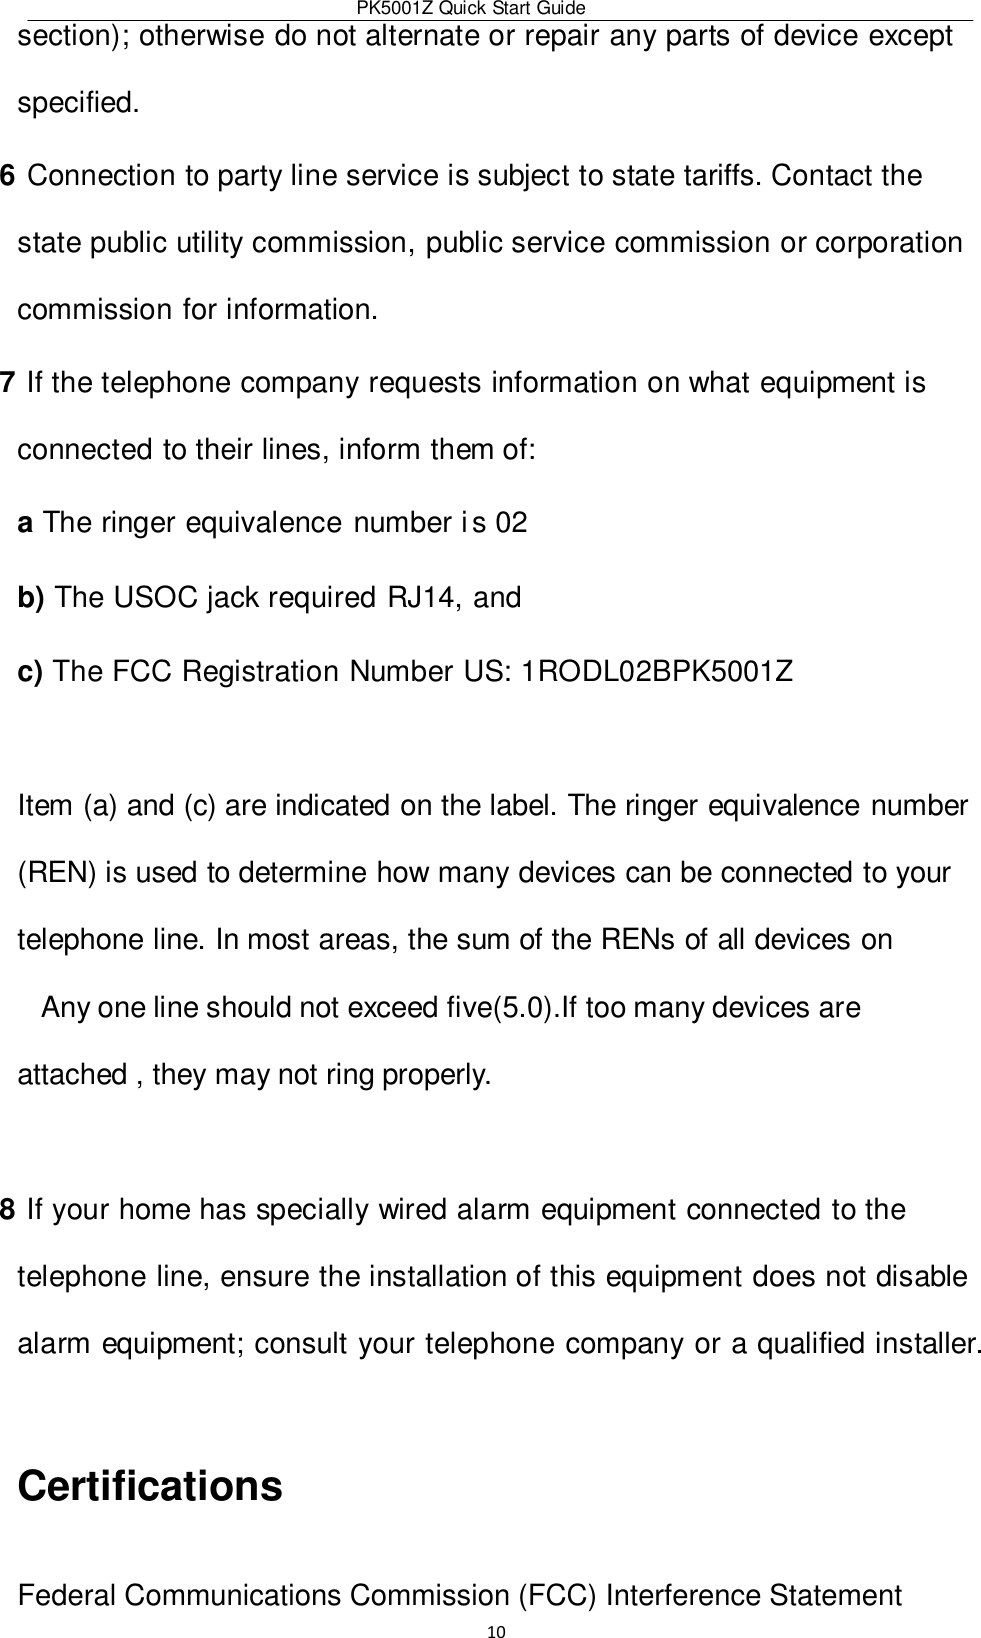 PK5001Z Quick Start Guide  10  section); otherwise do not alternate or repair any parts of device except specified. 6 Connection to party line service is subject to state tariffs. Contact the state public utility commission, public service commission or corporation commission for information. 7 If the telephone company requests information on what equipment is connected to their lines, inform them of: a The ringer equivalence number i s 02 b) The USOC jack required RJ14, and c) The FCC Registration Number US: 1RODL02BPK5001Z  Item (a) and (c) are indicated on the label. The ringer equivalence number (REN) is used to determine how many devices can be connected to your telephone line. In most areas, the sum of the RENs of all devices on Any one line should not exceed five(5.0).If too many devices are attached , they may not ring properly.   8 If your home has specially wired alarm equipment connected to the telephone line, ensure the installation of this equipment does not disable alarm equipment; consult your telephone company or a qualified installer.  Certifications  Federal Communications Commission (FCC) Interference Statement  